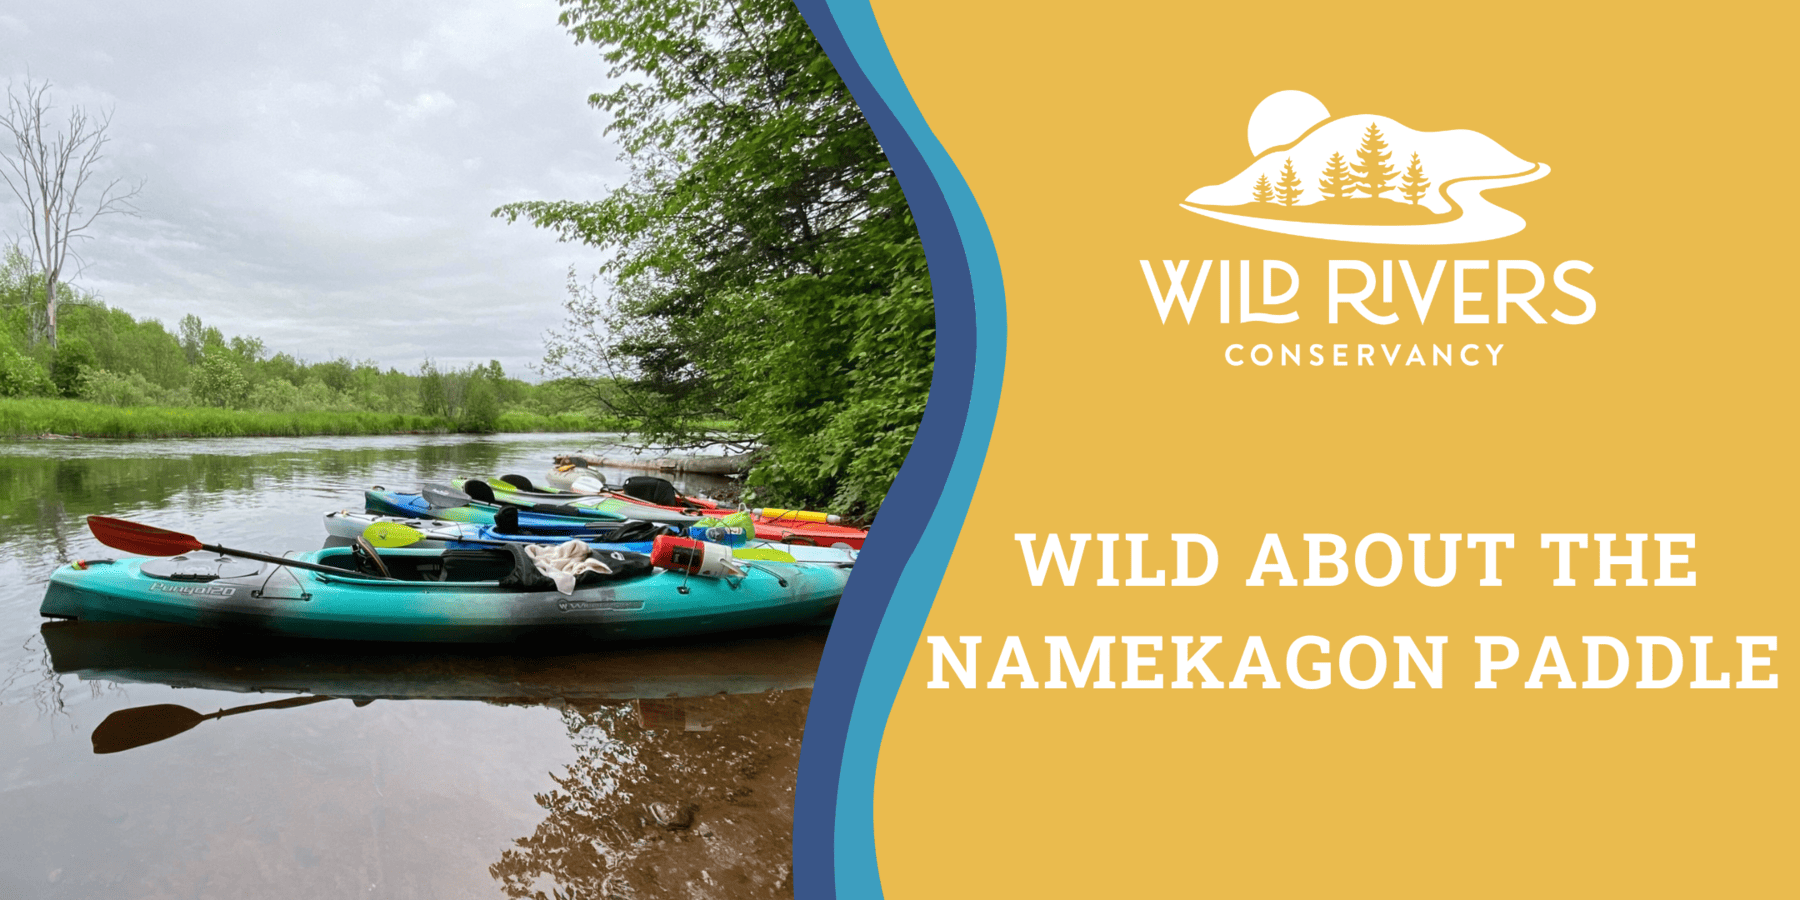 Wild about the Namekagon day paddle